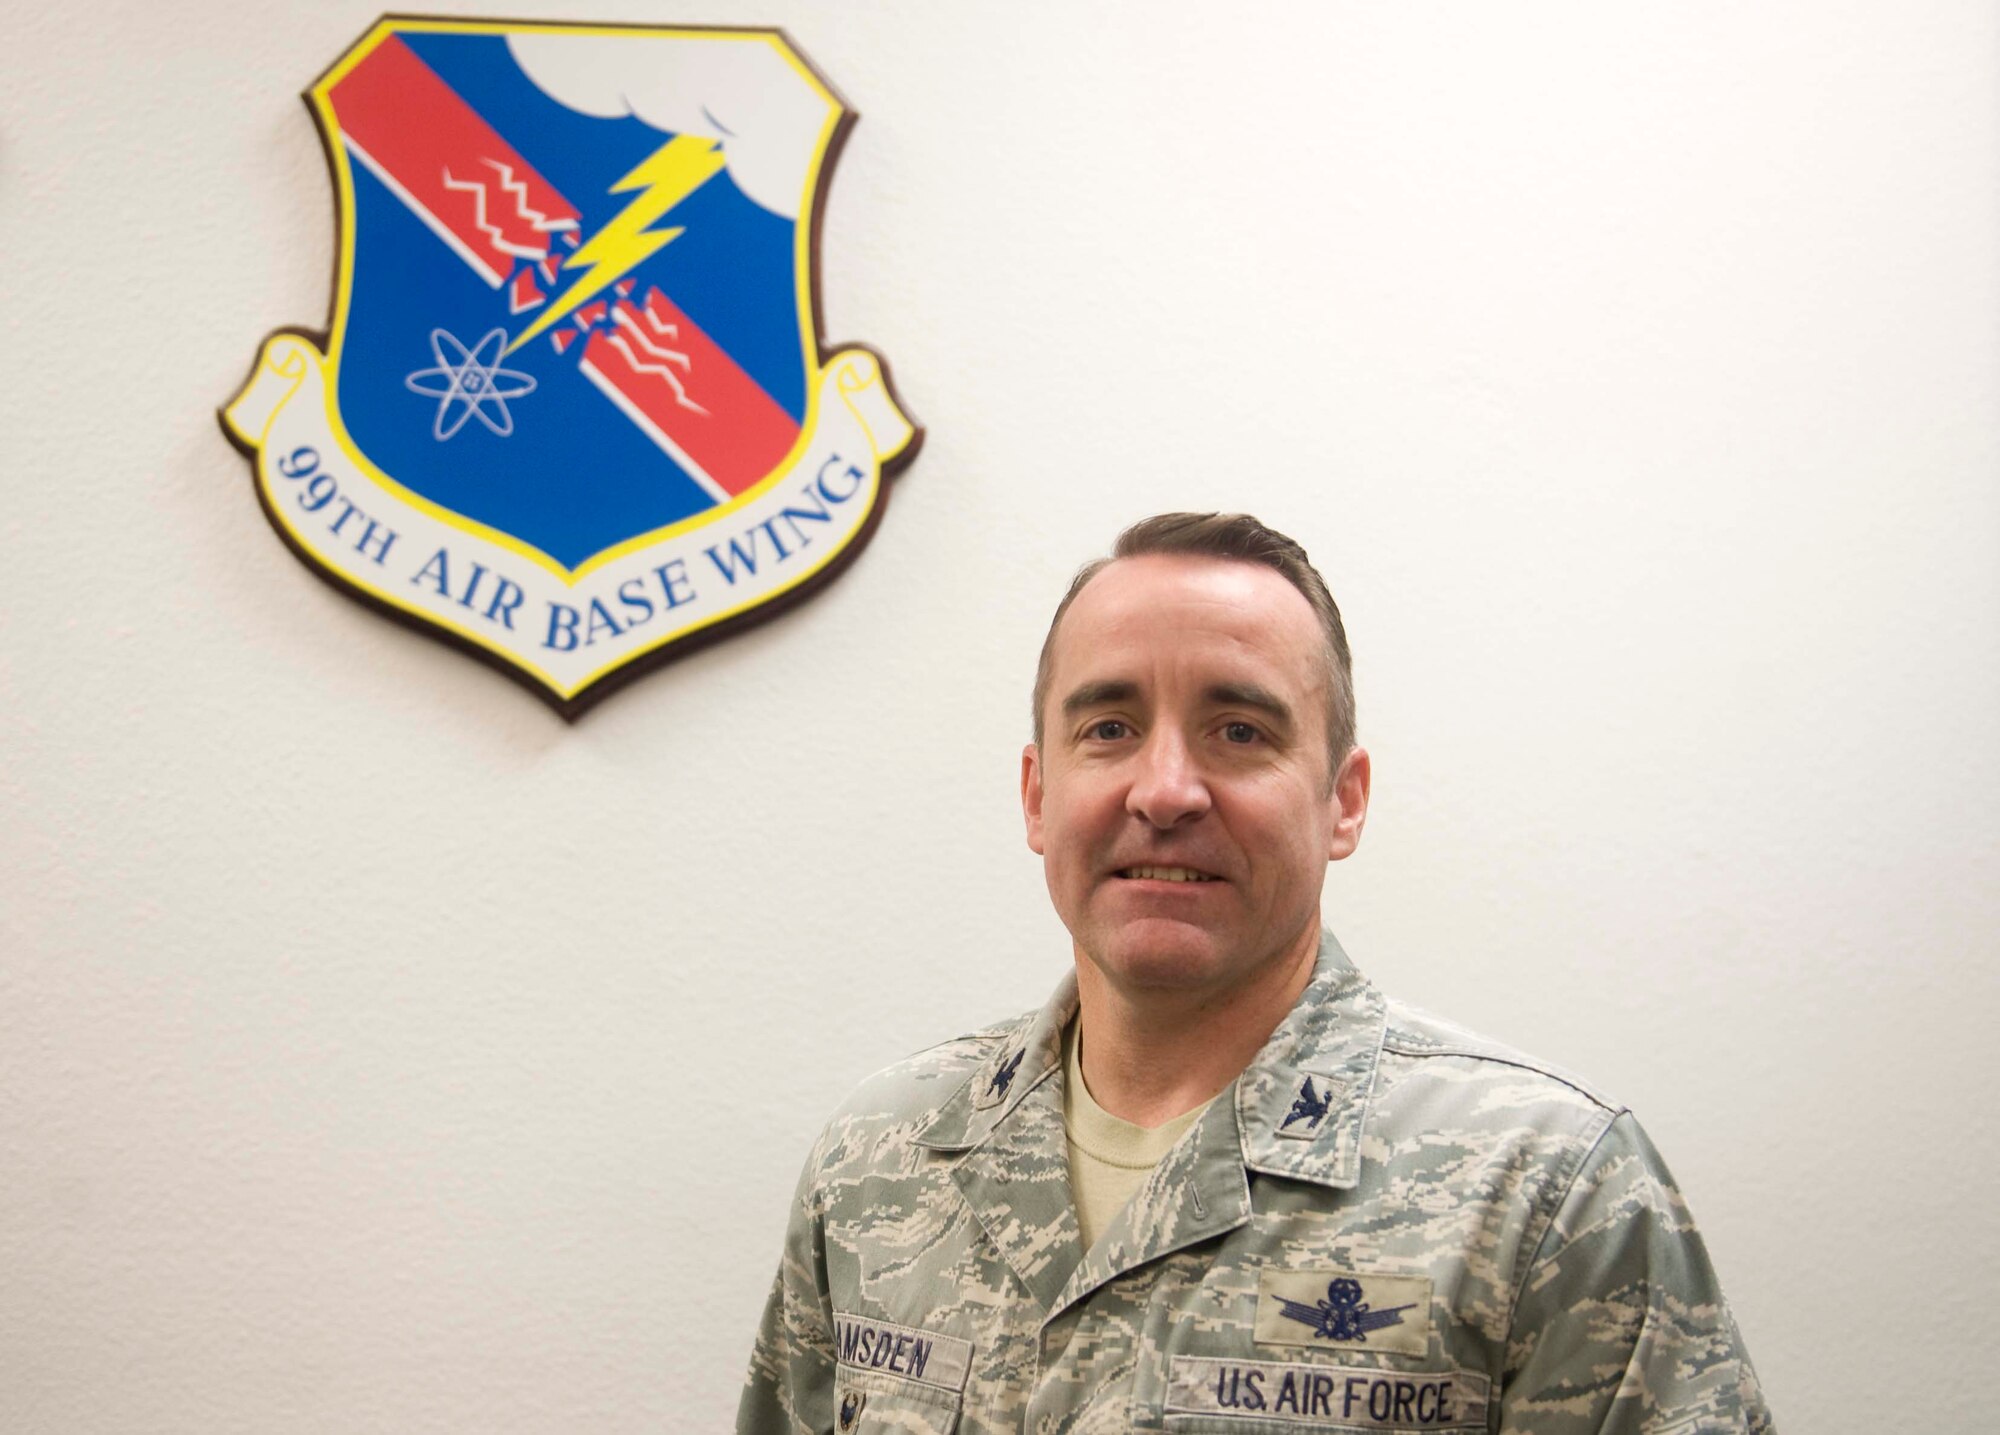 “Mothers Day is important because she made me who I am today.” – Col. Robert Ramsden, 99th Air Base Wing vice commander